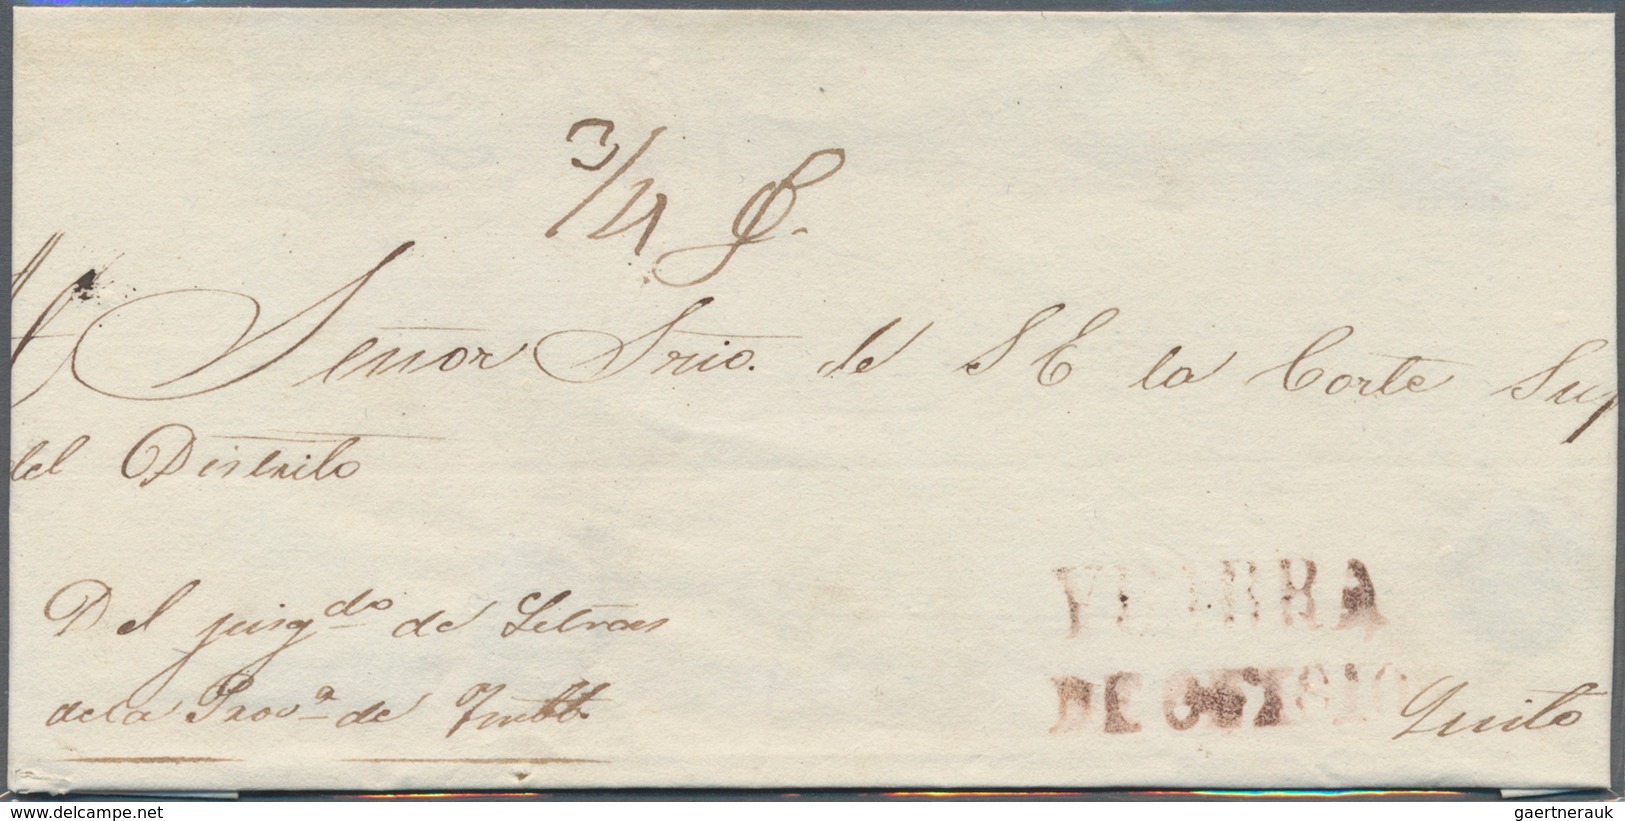 Ecuador: 1840's-50's ca.: Five covers from YBARRA to Quito with four different Ybarra handstamps in